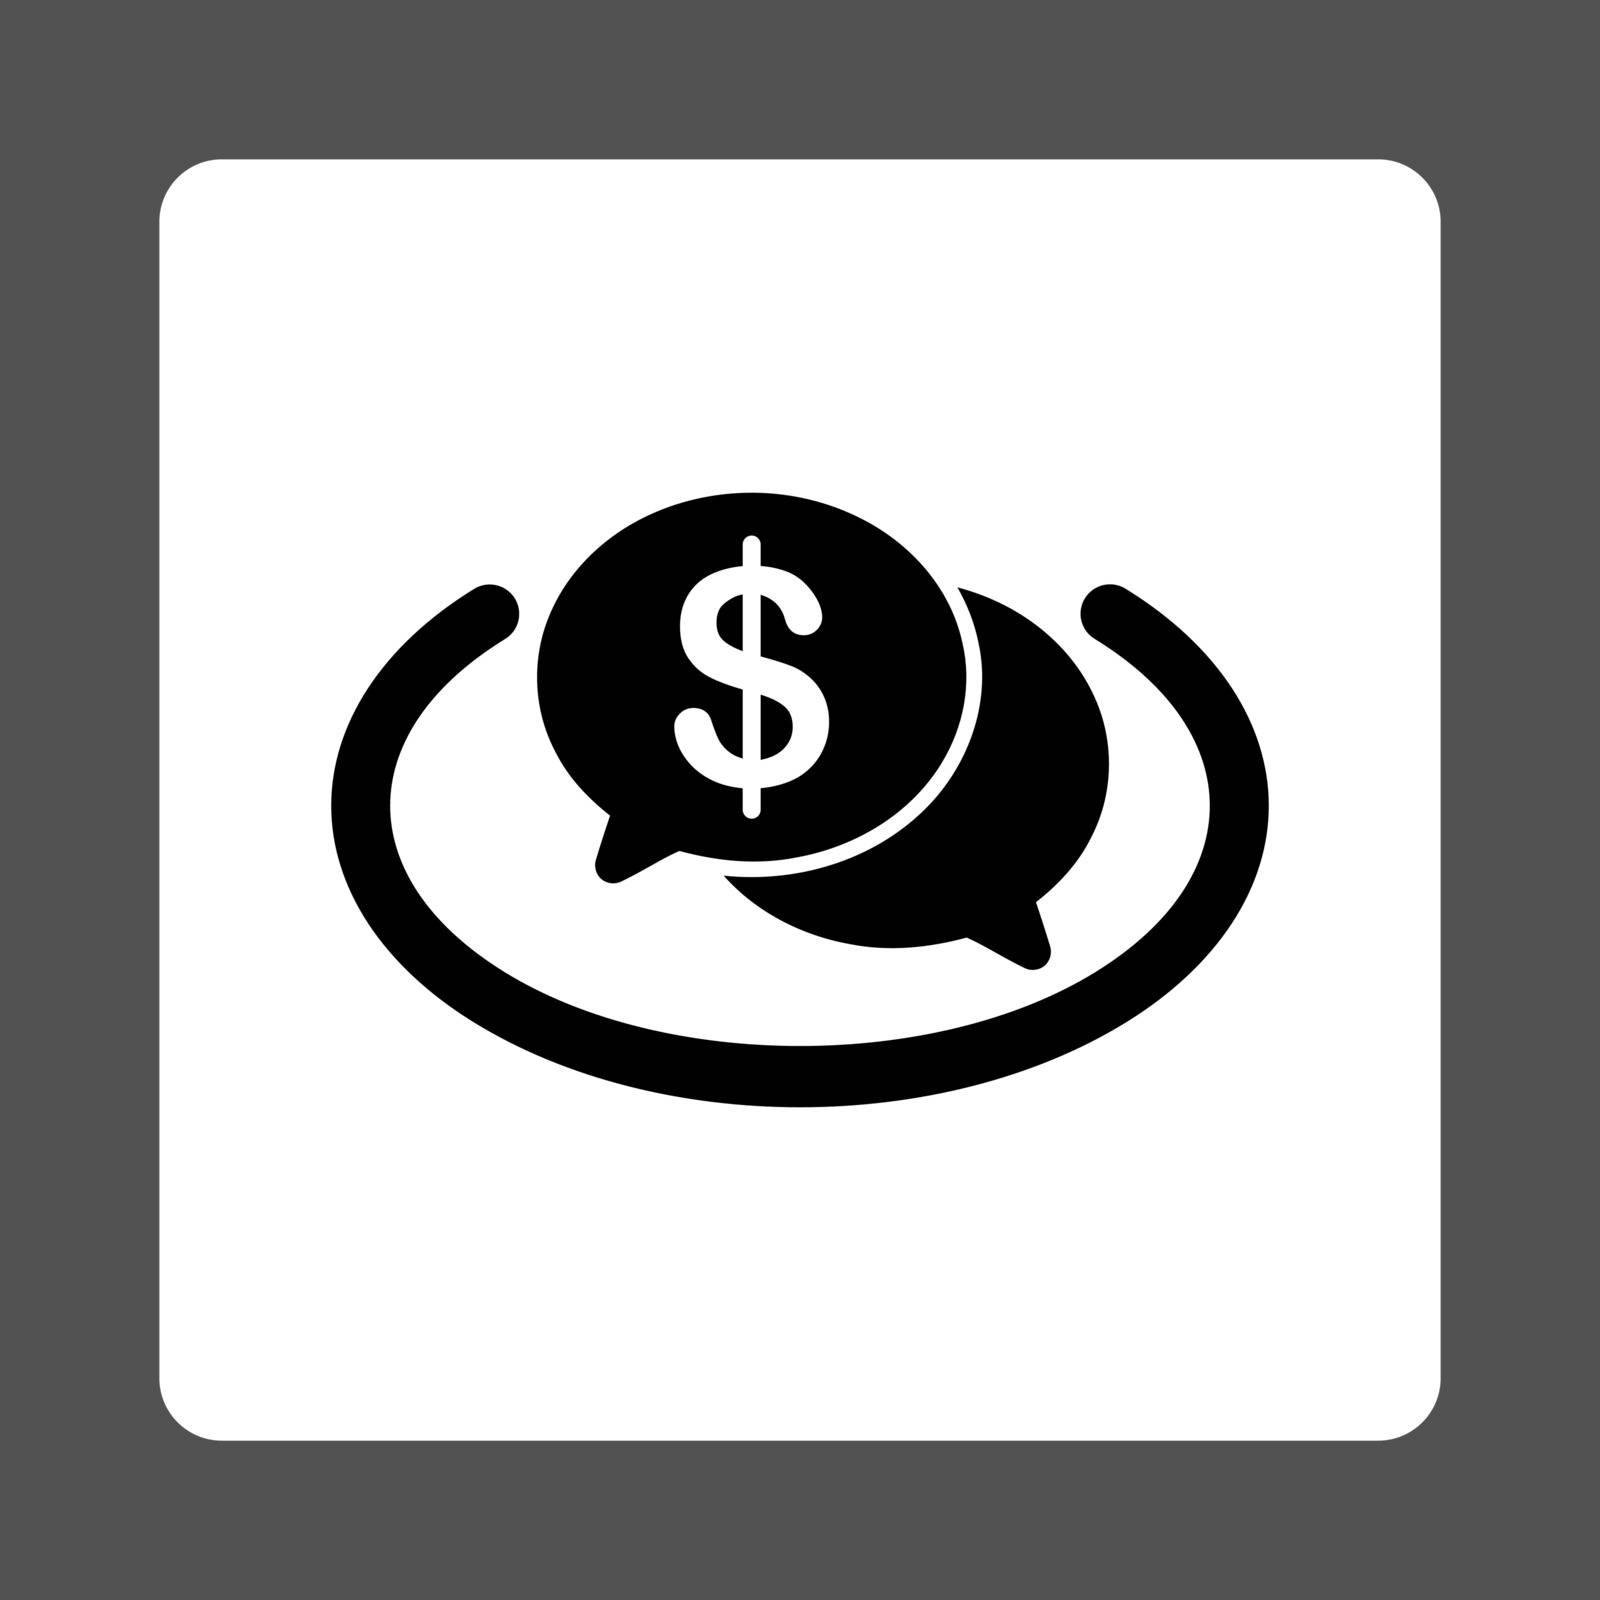 Financial Network icon. This flat rounded square button uses black and white colors and isolated on a gray background.